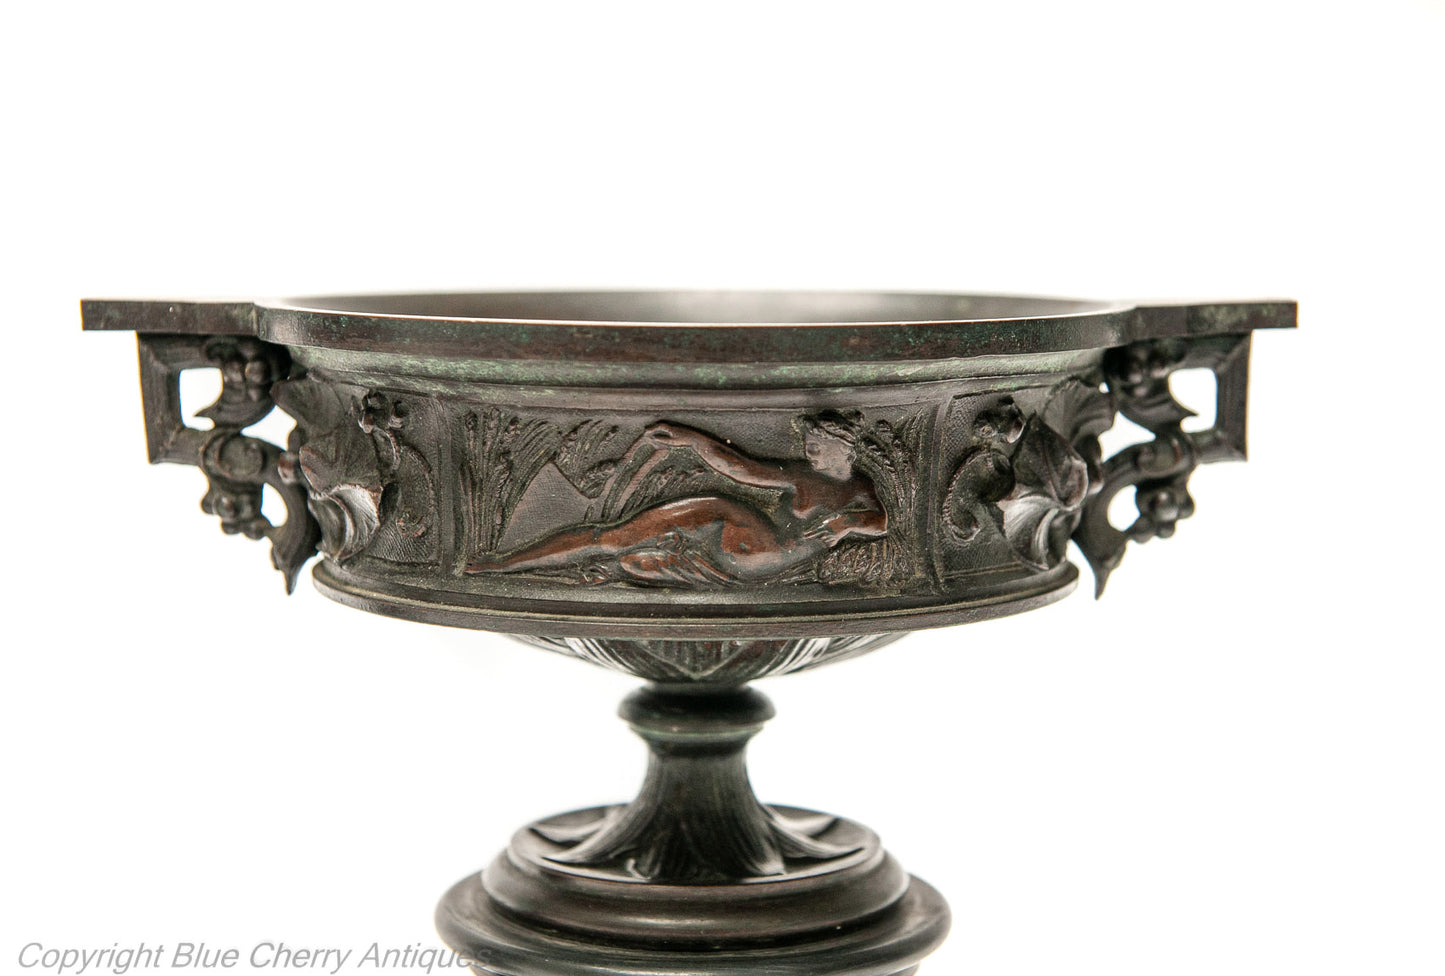 Pair Antique French Bronze & Black Stone Classical Urns with Reclining Figures (Code 1747)